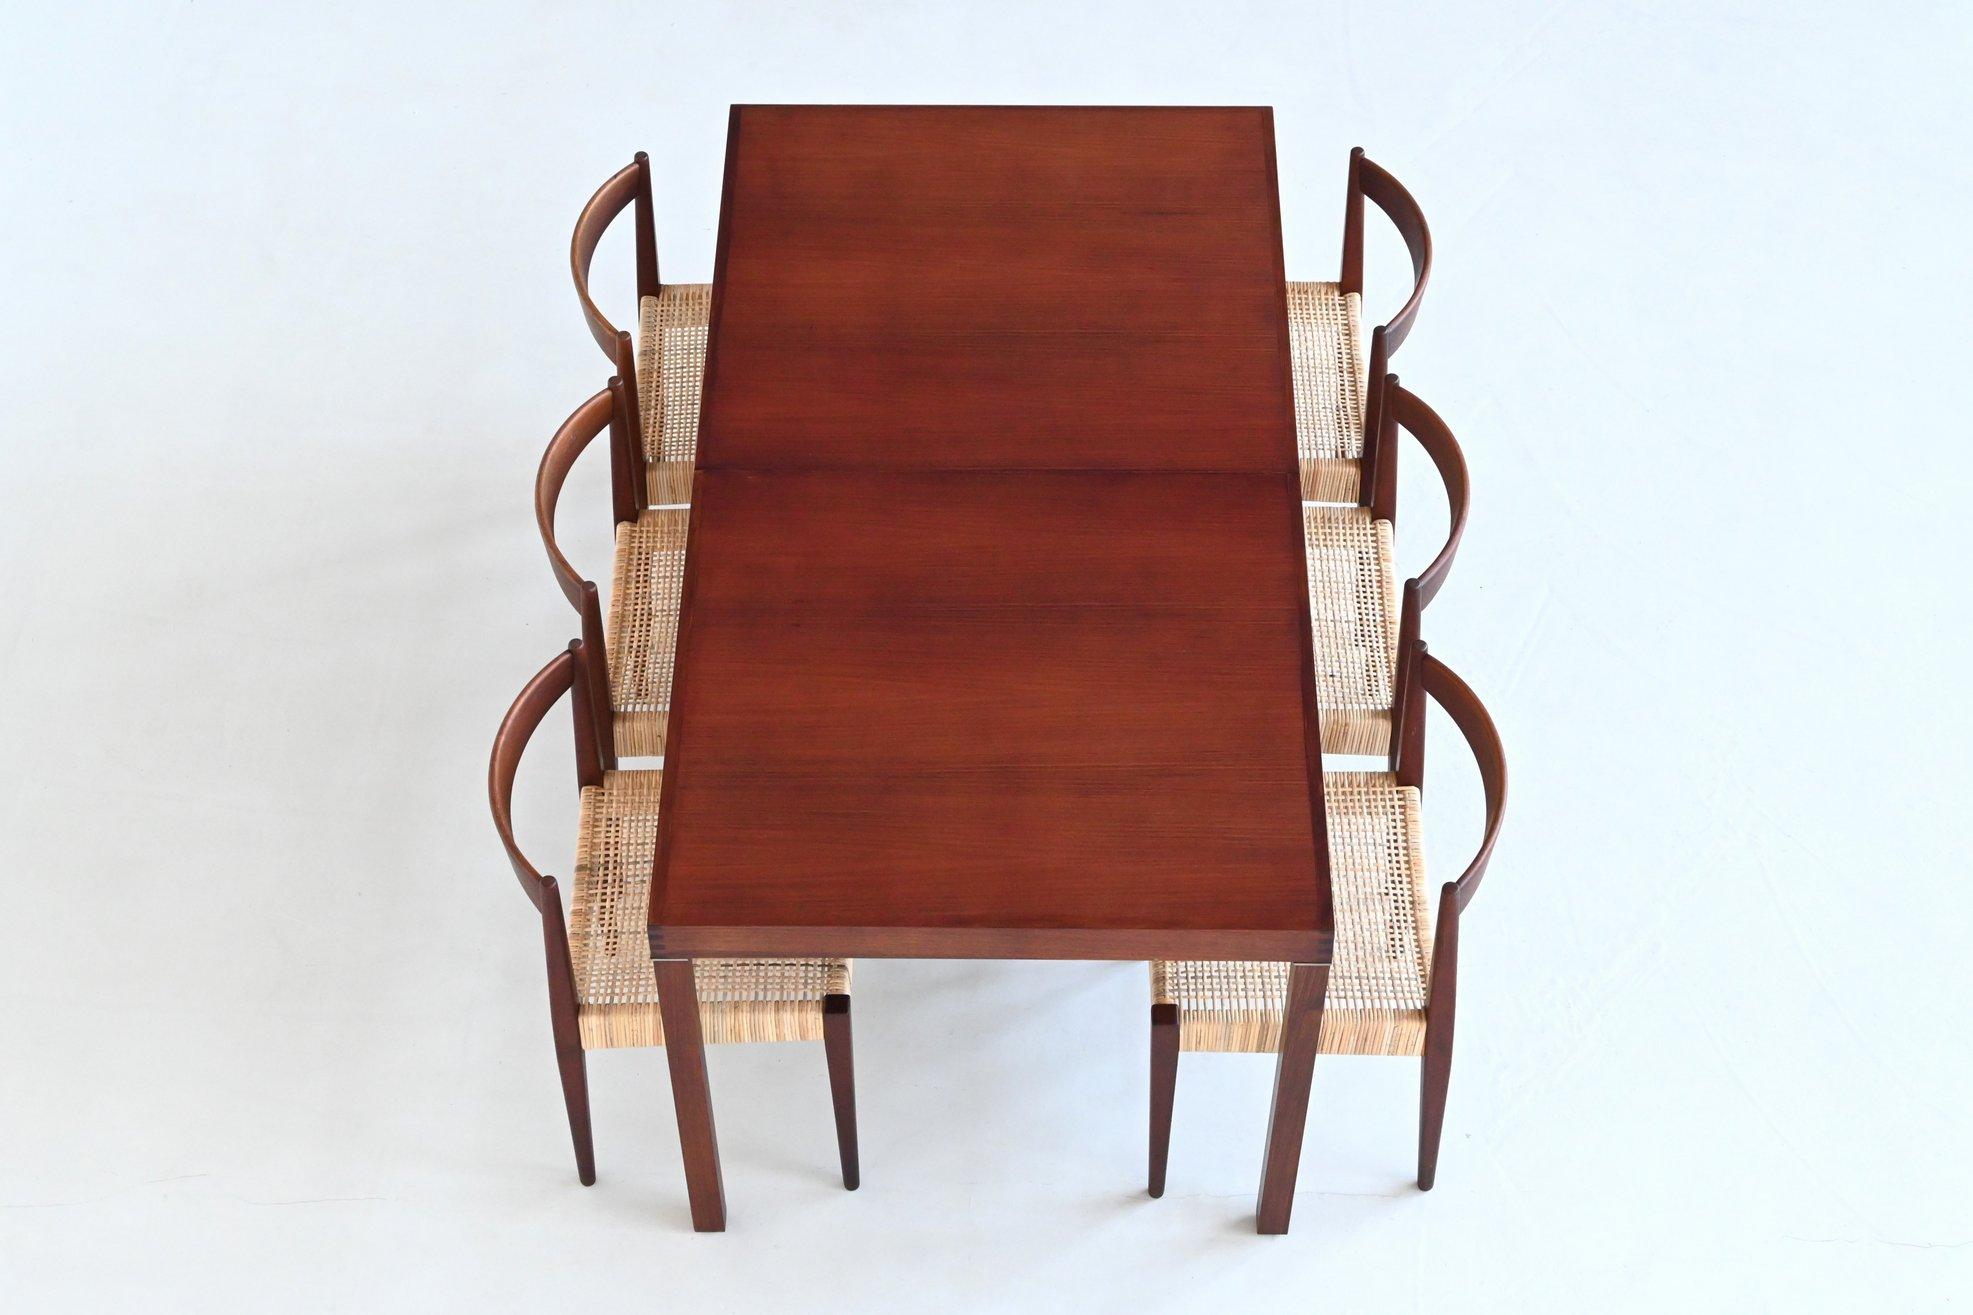 Beautiful extendable dining table designed by Inger Klingenberg for Fristho Franeker, The Netherlands 1960. It is executed in rosewood with a natural expression due to the beautiful wooden grains and warm tone. This well-crafted table is